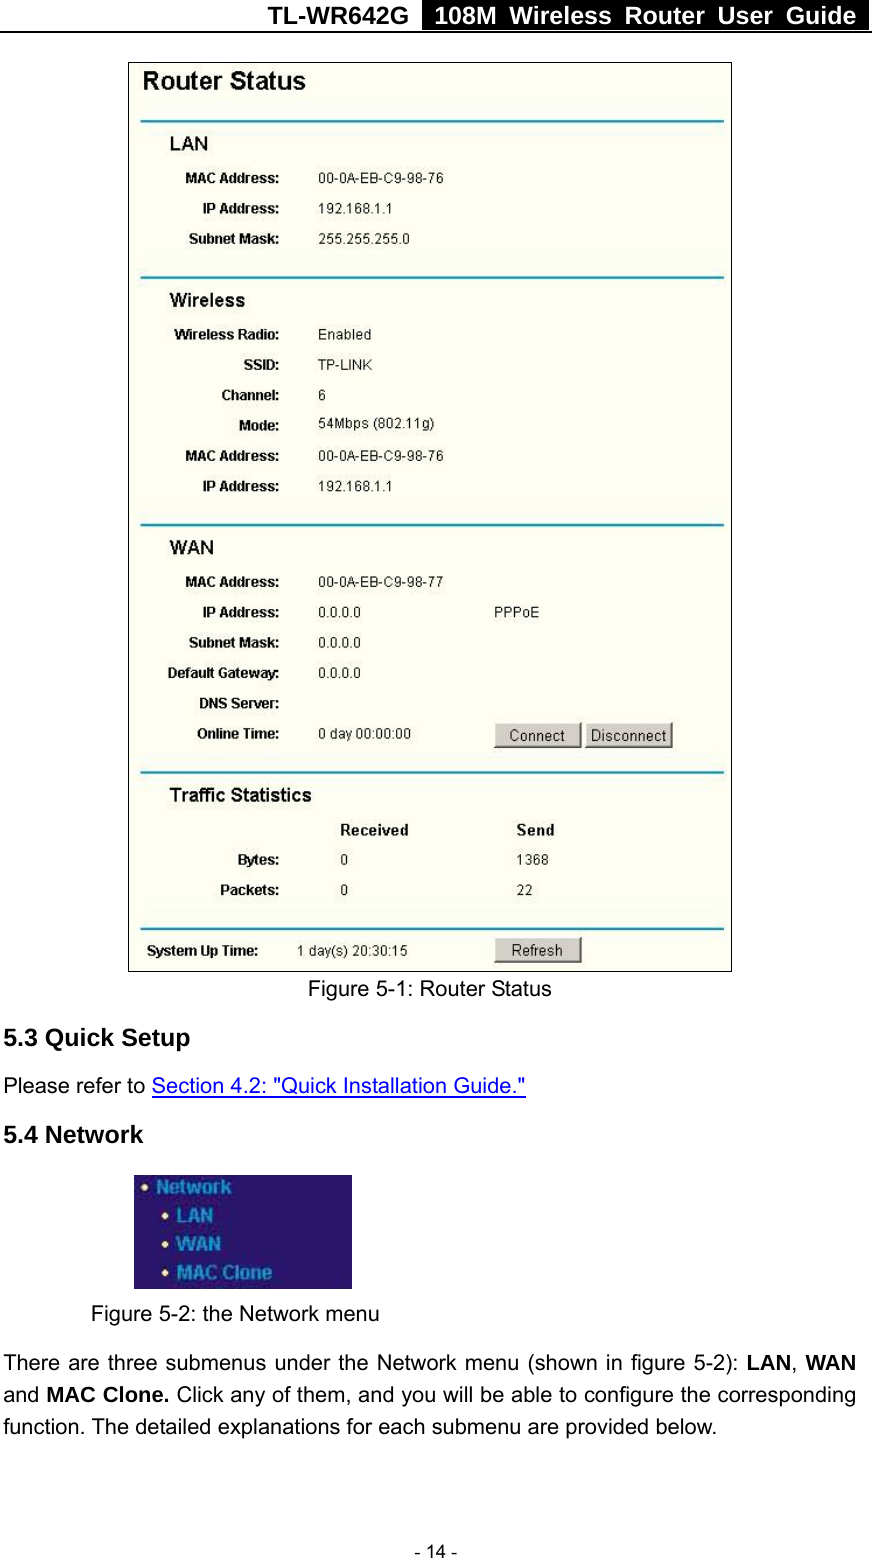 TL-WR642G   108M Wireless Router User Guide   - 14 -  Figure 5-1: Router Status 5.3 Quick Setup Please refer to Section 4.2: &quot;Quick Installation Guide.&quot; 5.4 Network      Figure 5-2: the Network menu There are three submenus under the Network menu (shown in figure 5-2): LAN, WAN and MAC Clone. Click any of them, and you will be able to configure the corresponding function. The detailed explanations for each submenu are provided below. 